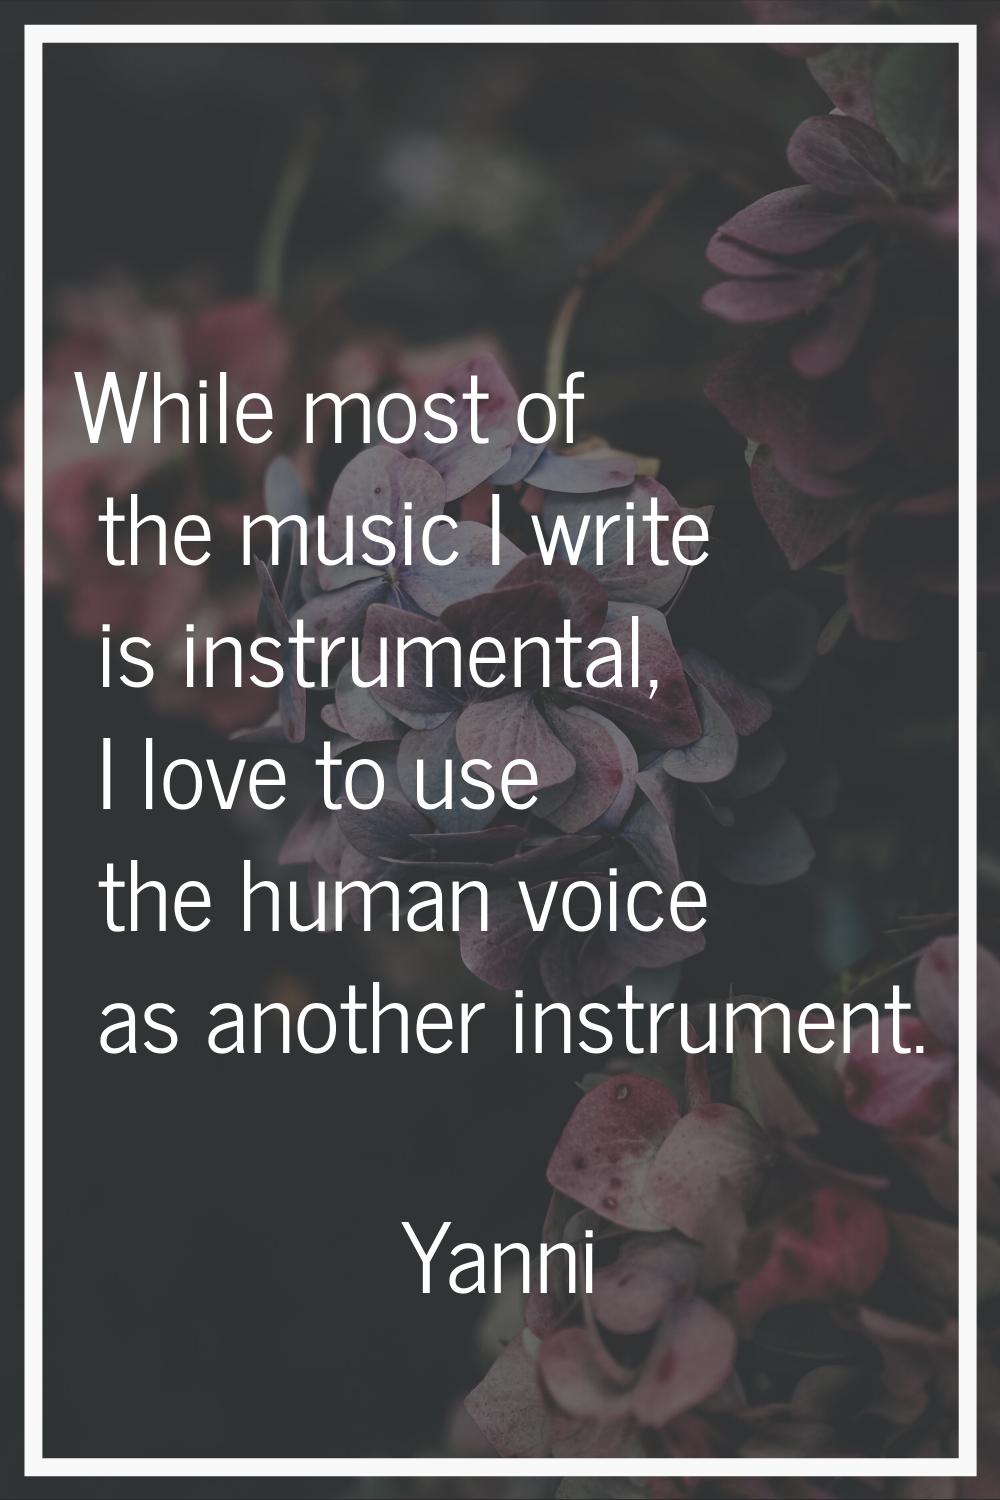 While most of the music I write is instrumental, I love to use the human voice as another instrumen